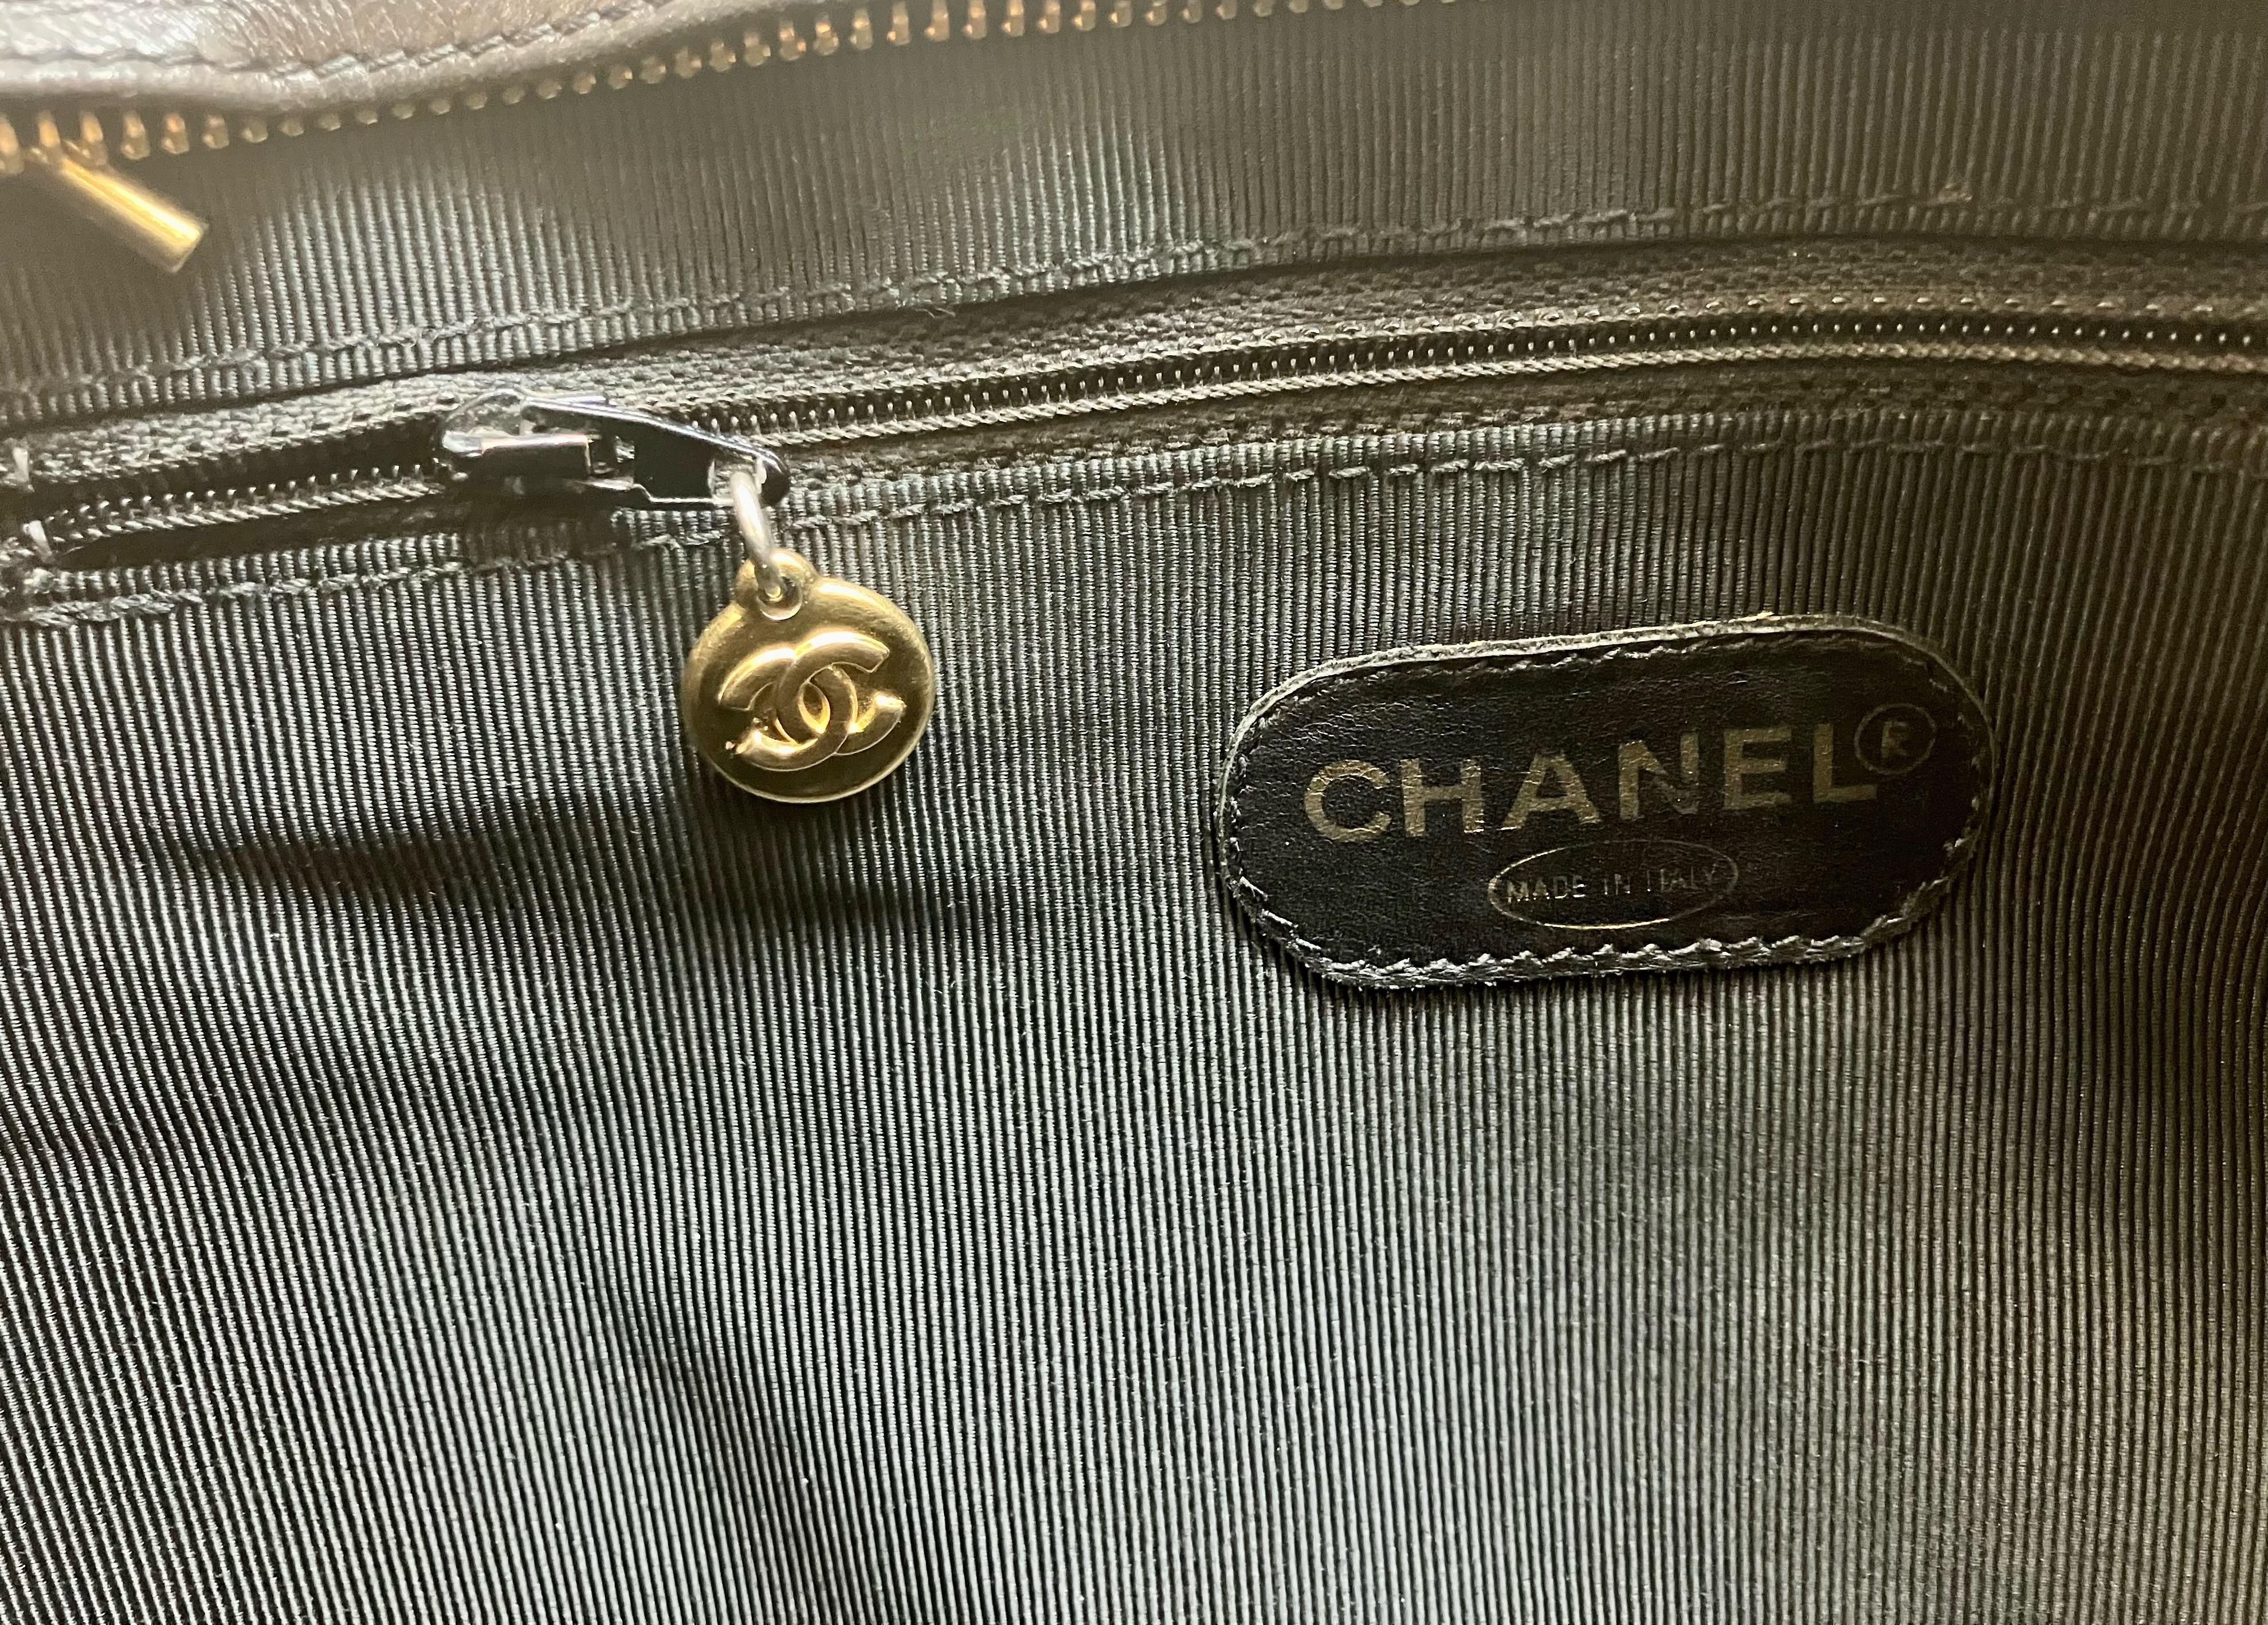 1994-1995 Chanel Black Chocolate Leather Shopping Tote Bag For Sale 2